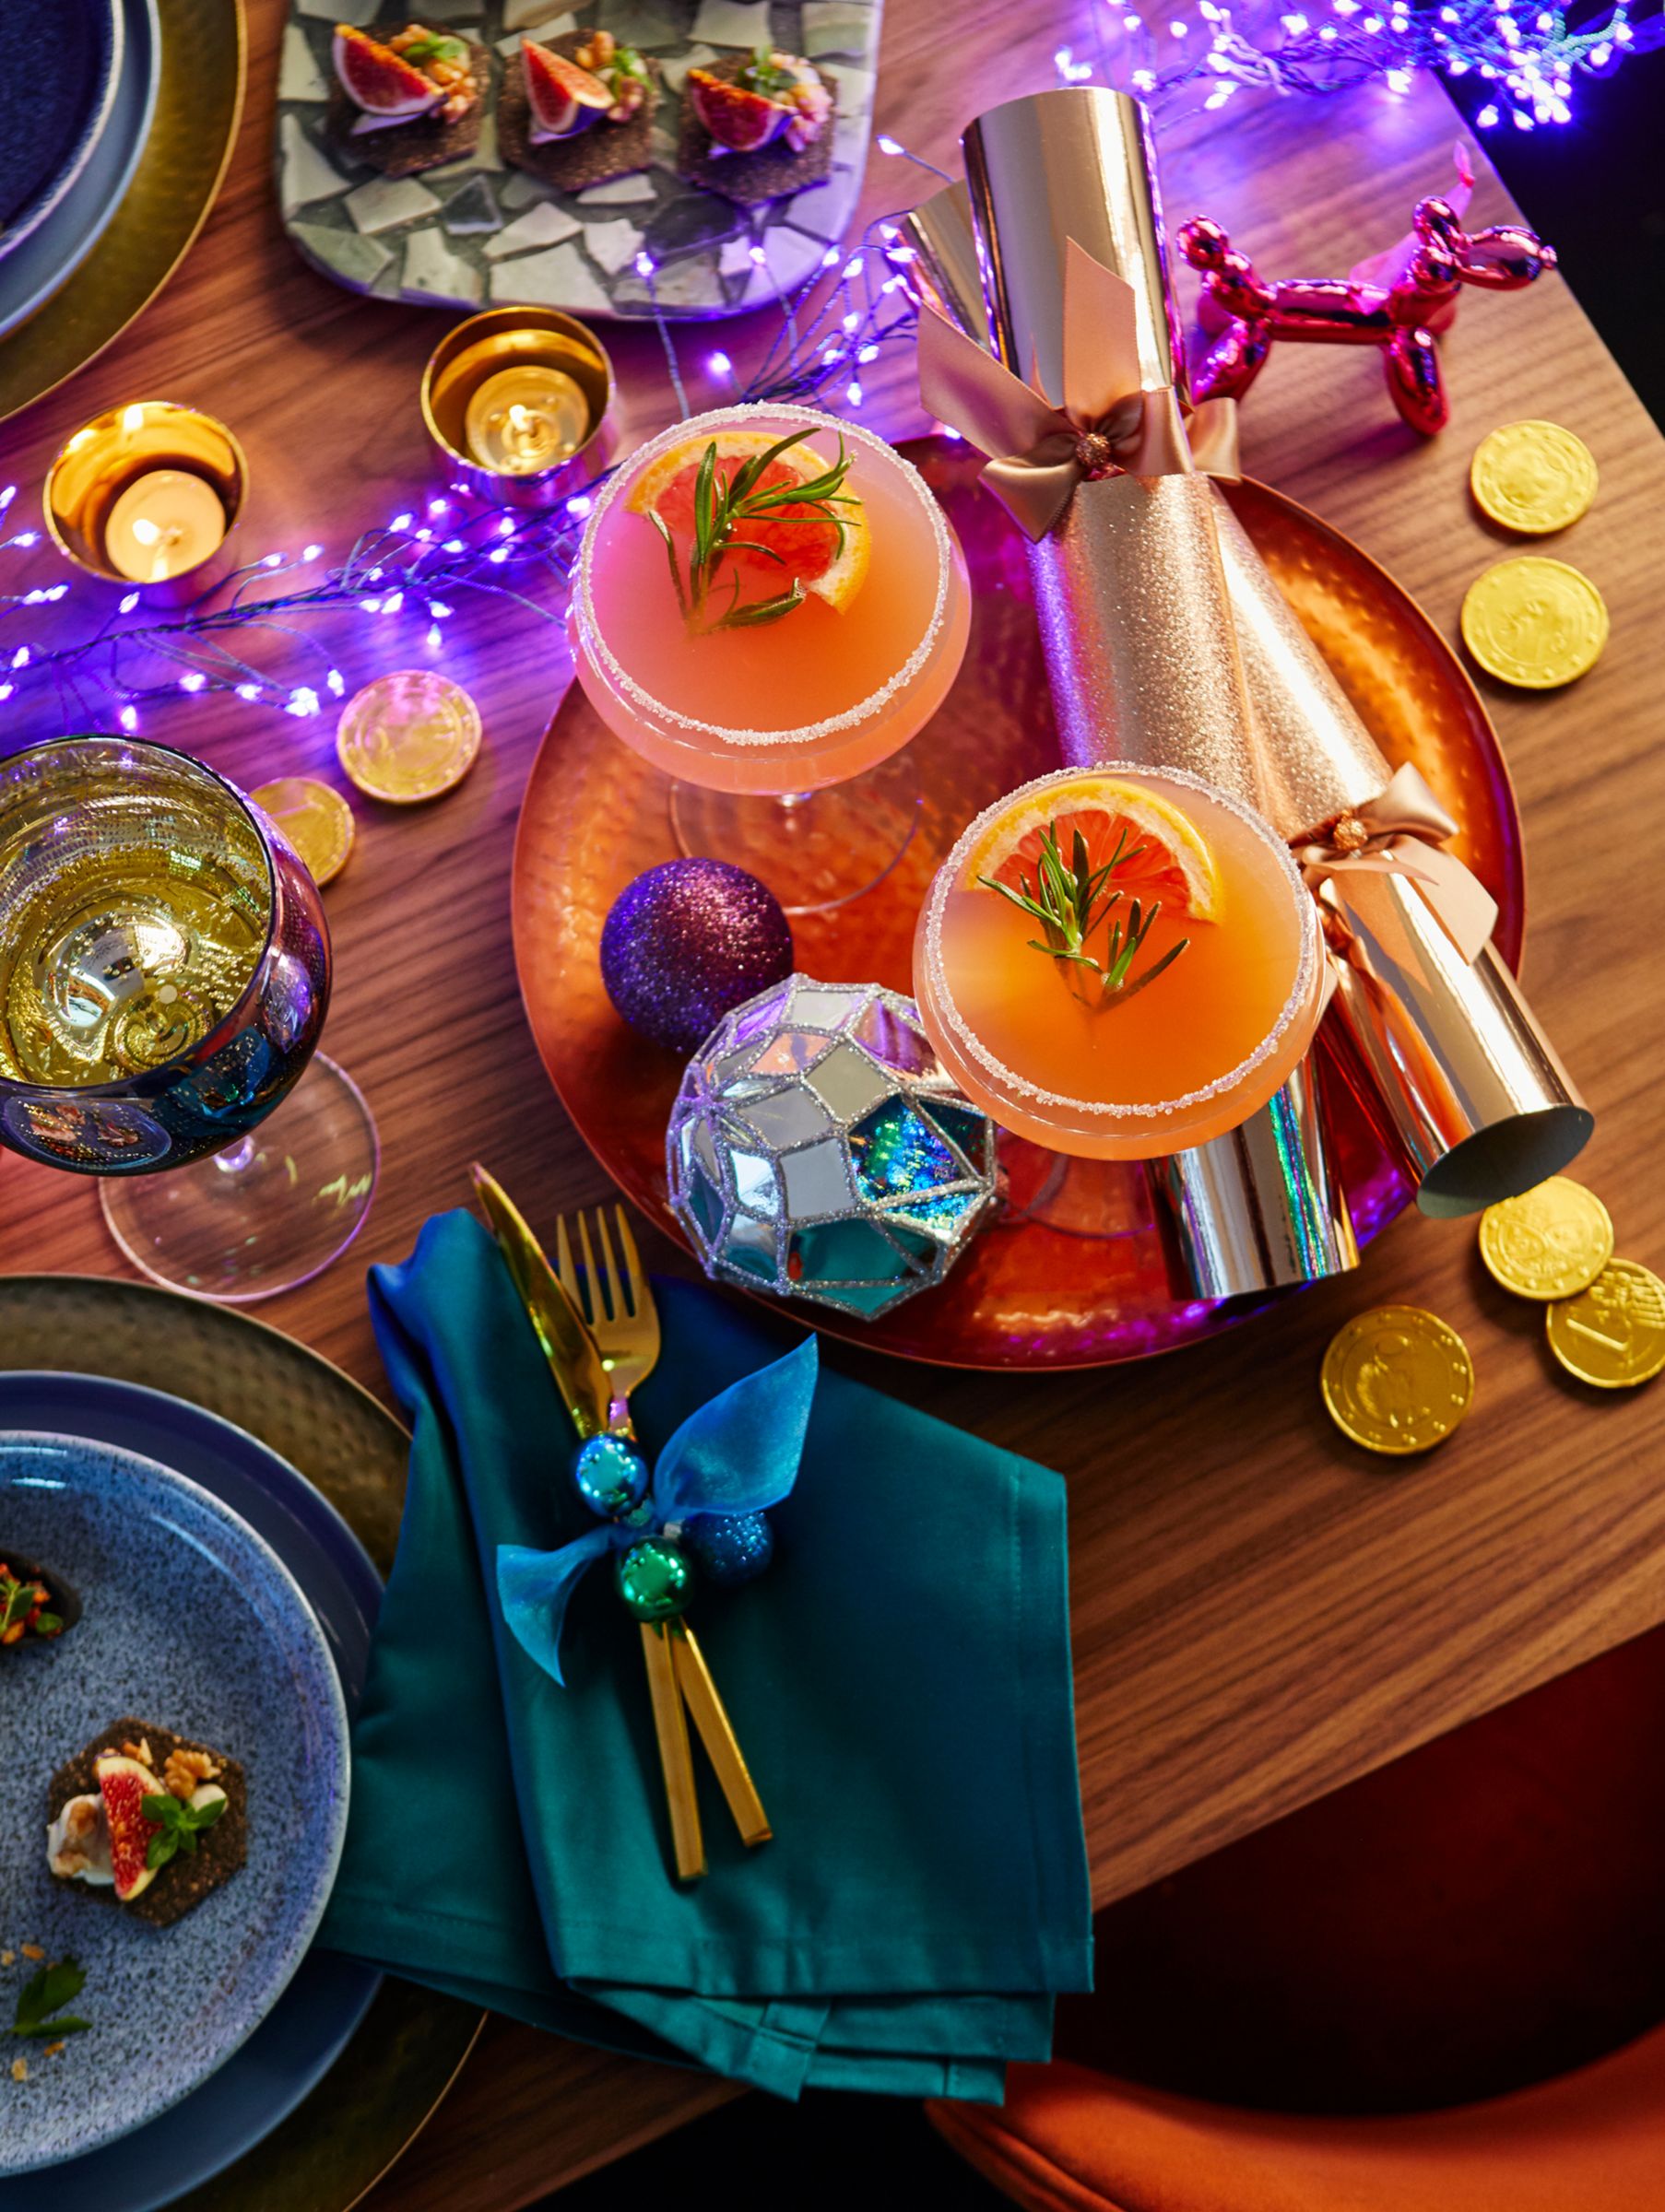 Time to Party - Tableware and decorations